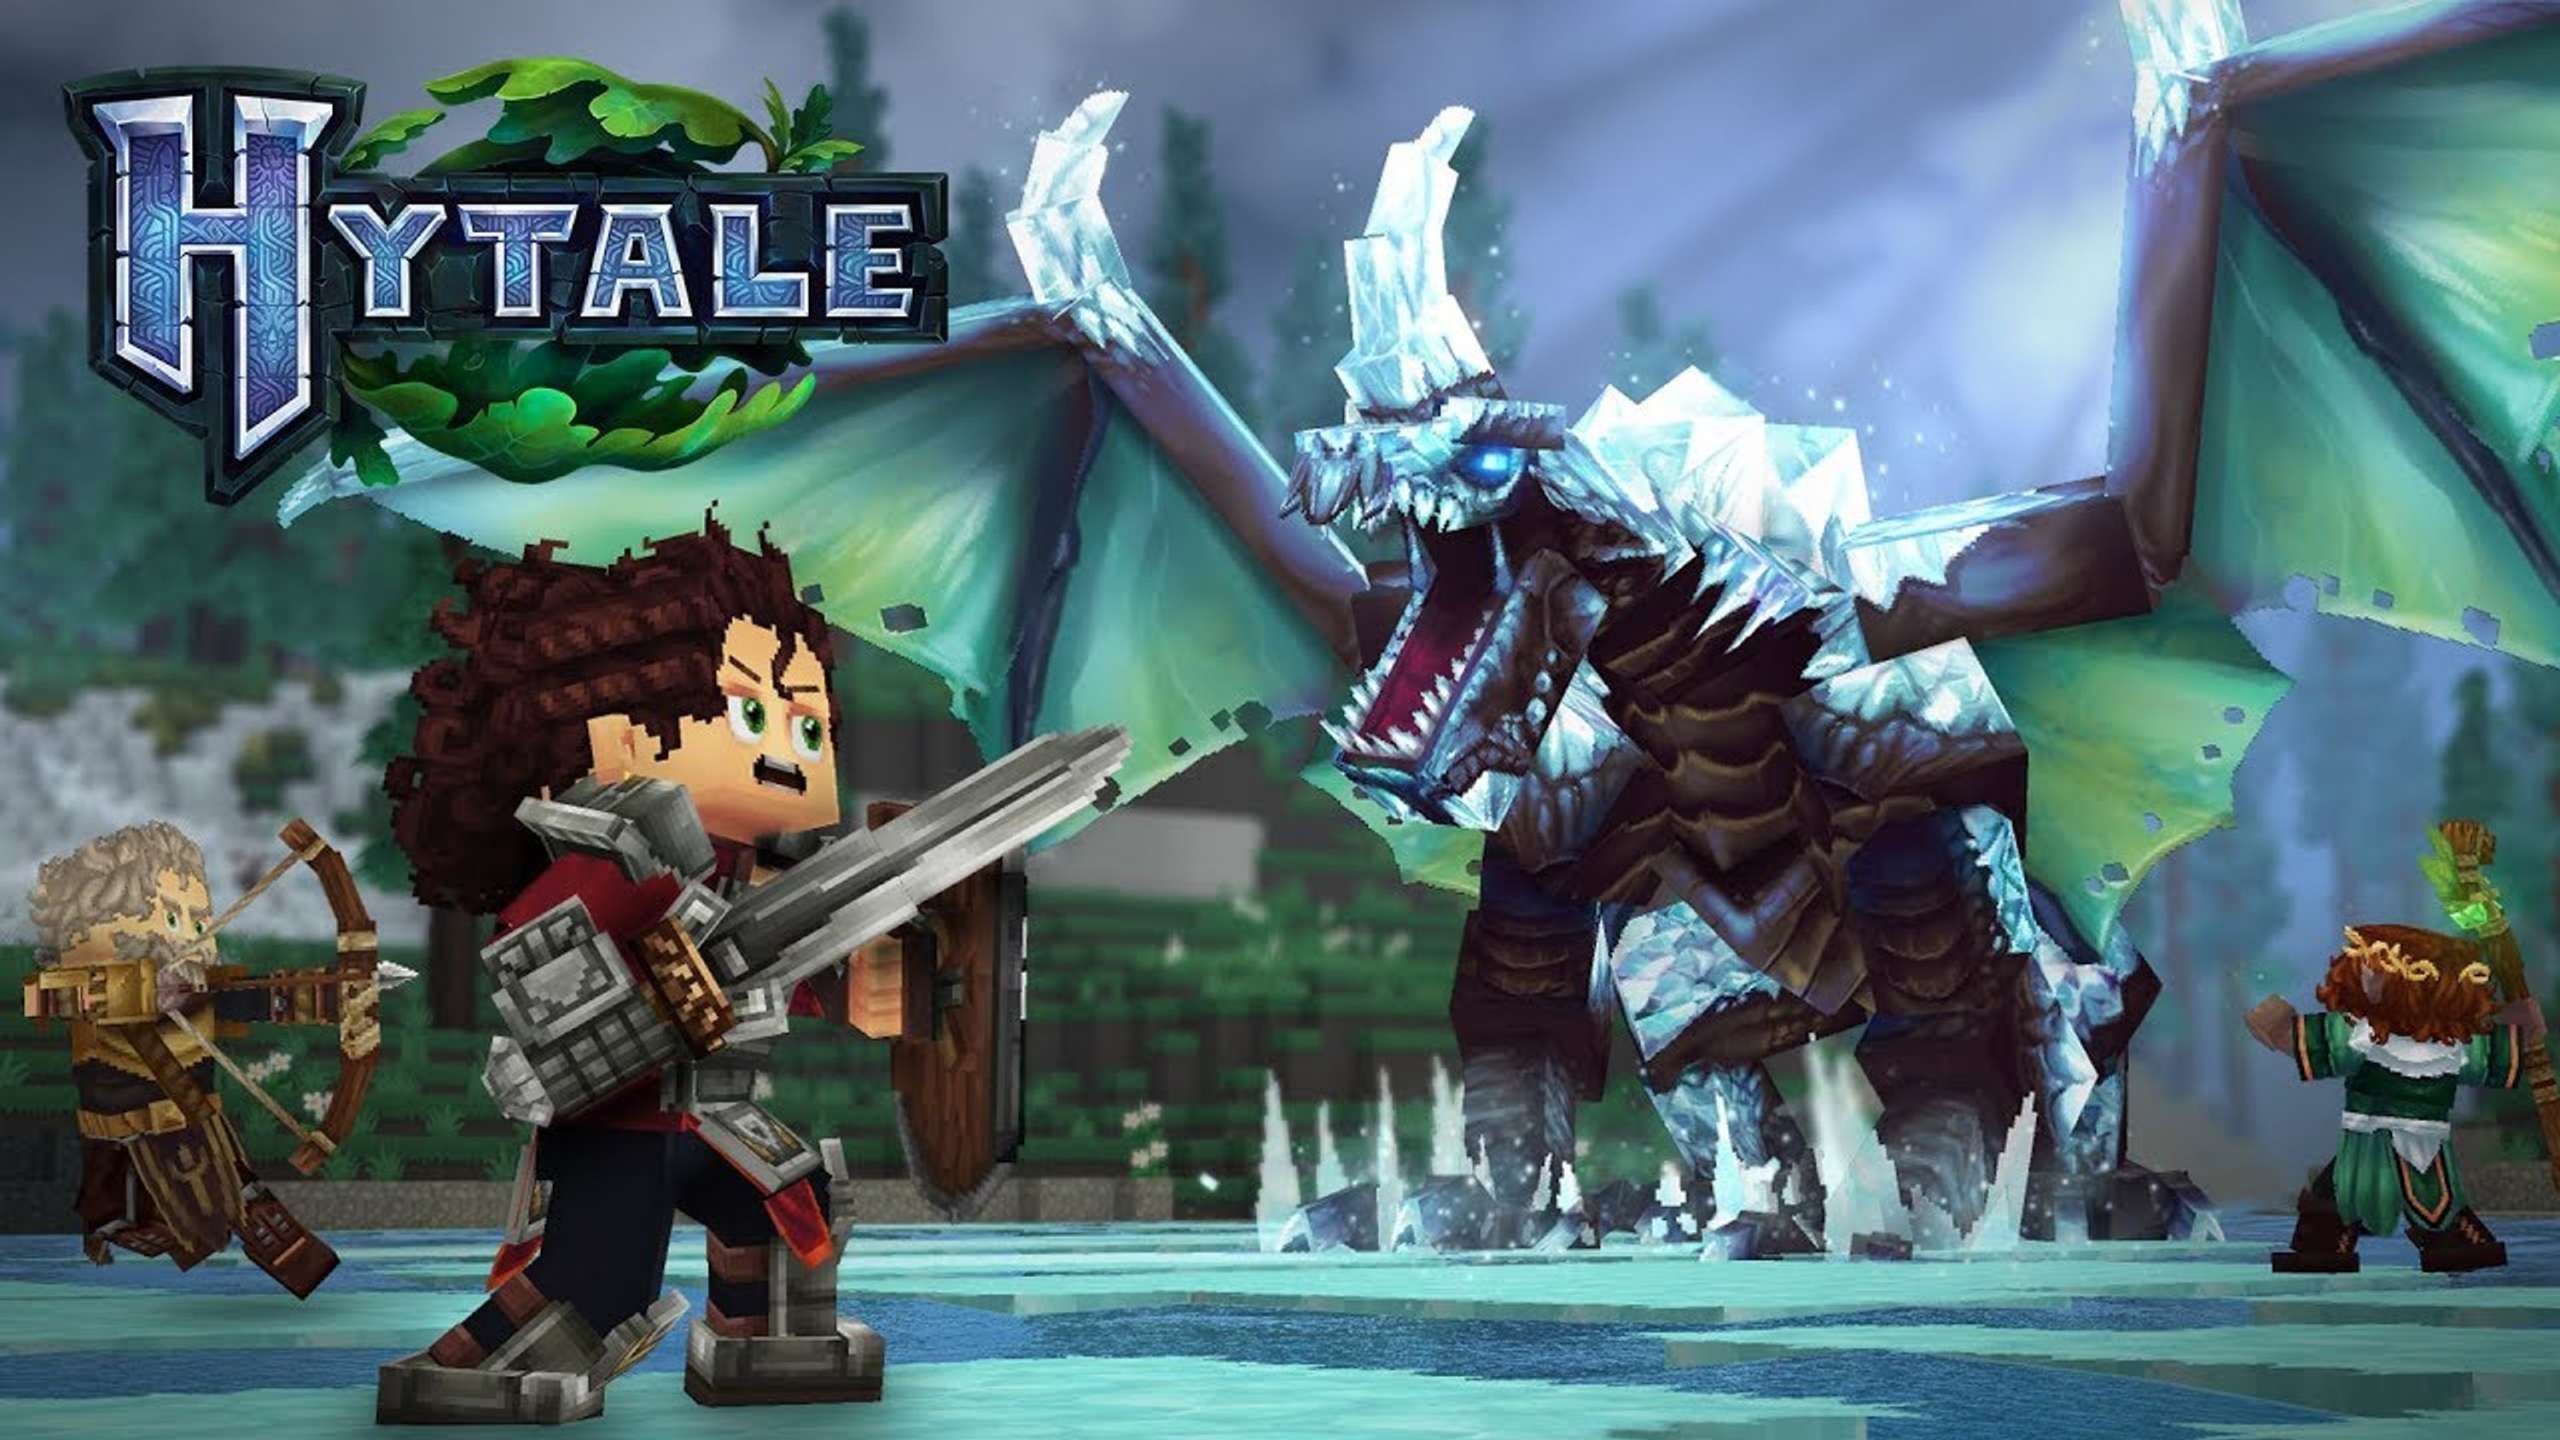 Hytale’s Creators Have Stated That The Game Won’t Be Launched In 2023